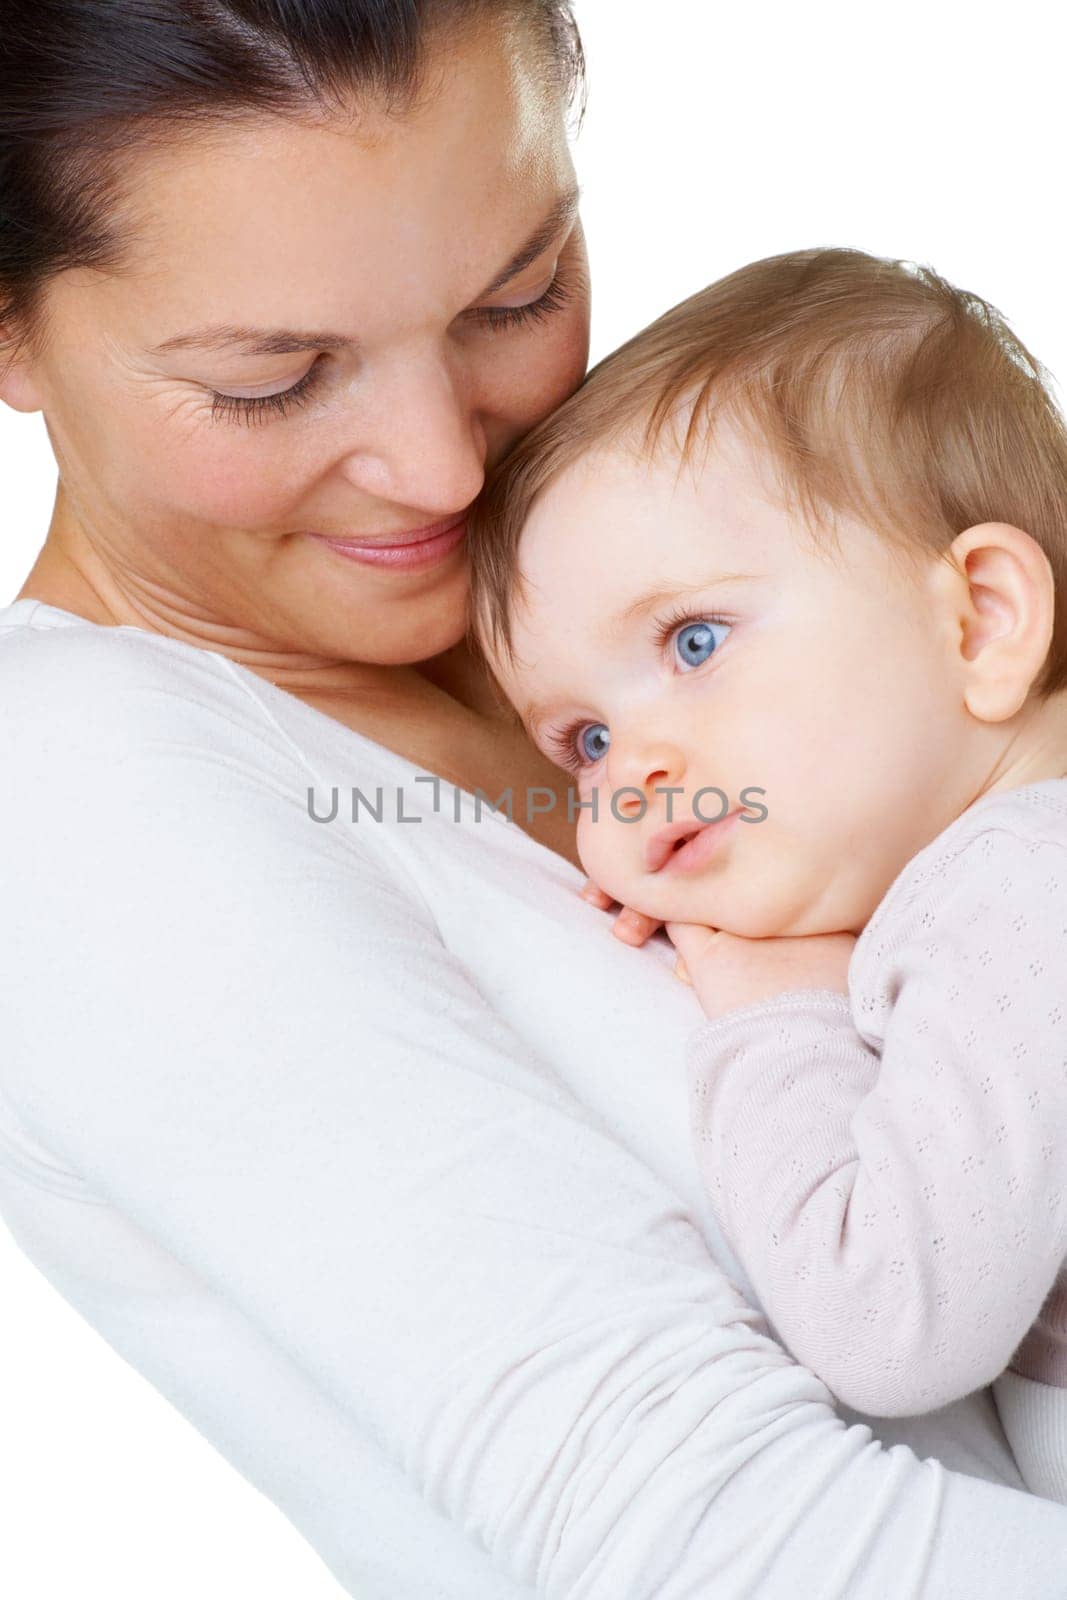 Love, smile and mother with baby in a studio hug, care and embracing against a white background. Face, relax and parent with little boy hugging, happy and enjoy bond, relationship and motherhood.